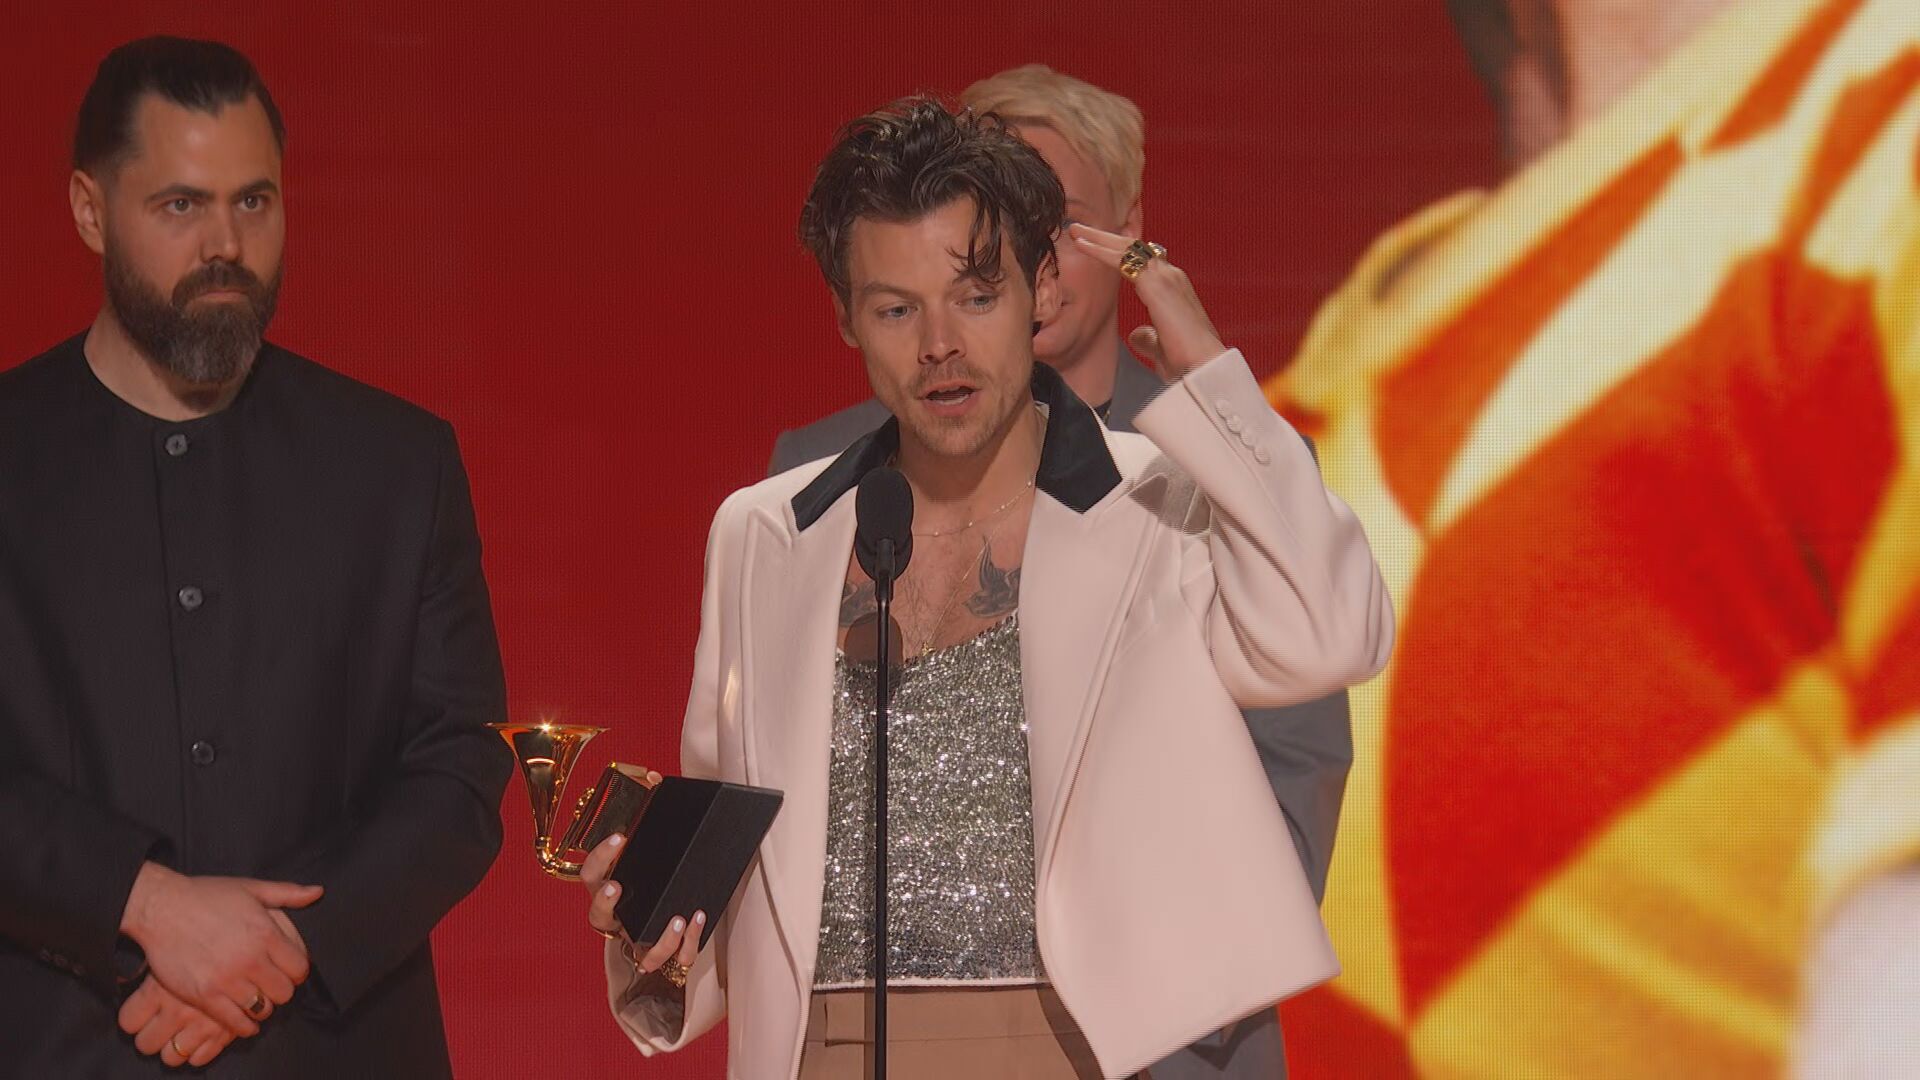 Harry Styles delivers speech after winning Album of the Year at the 2023 Grammys